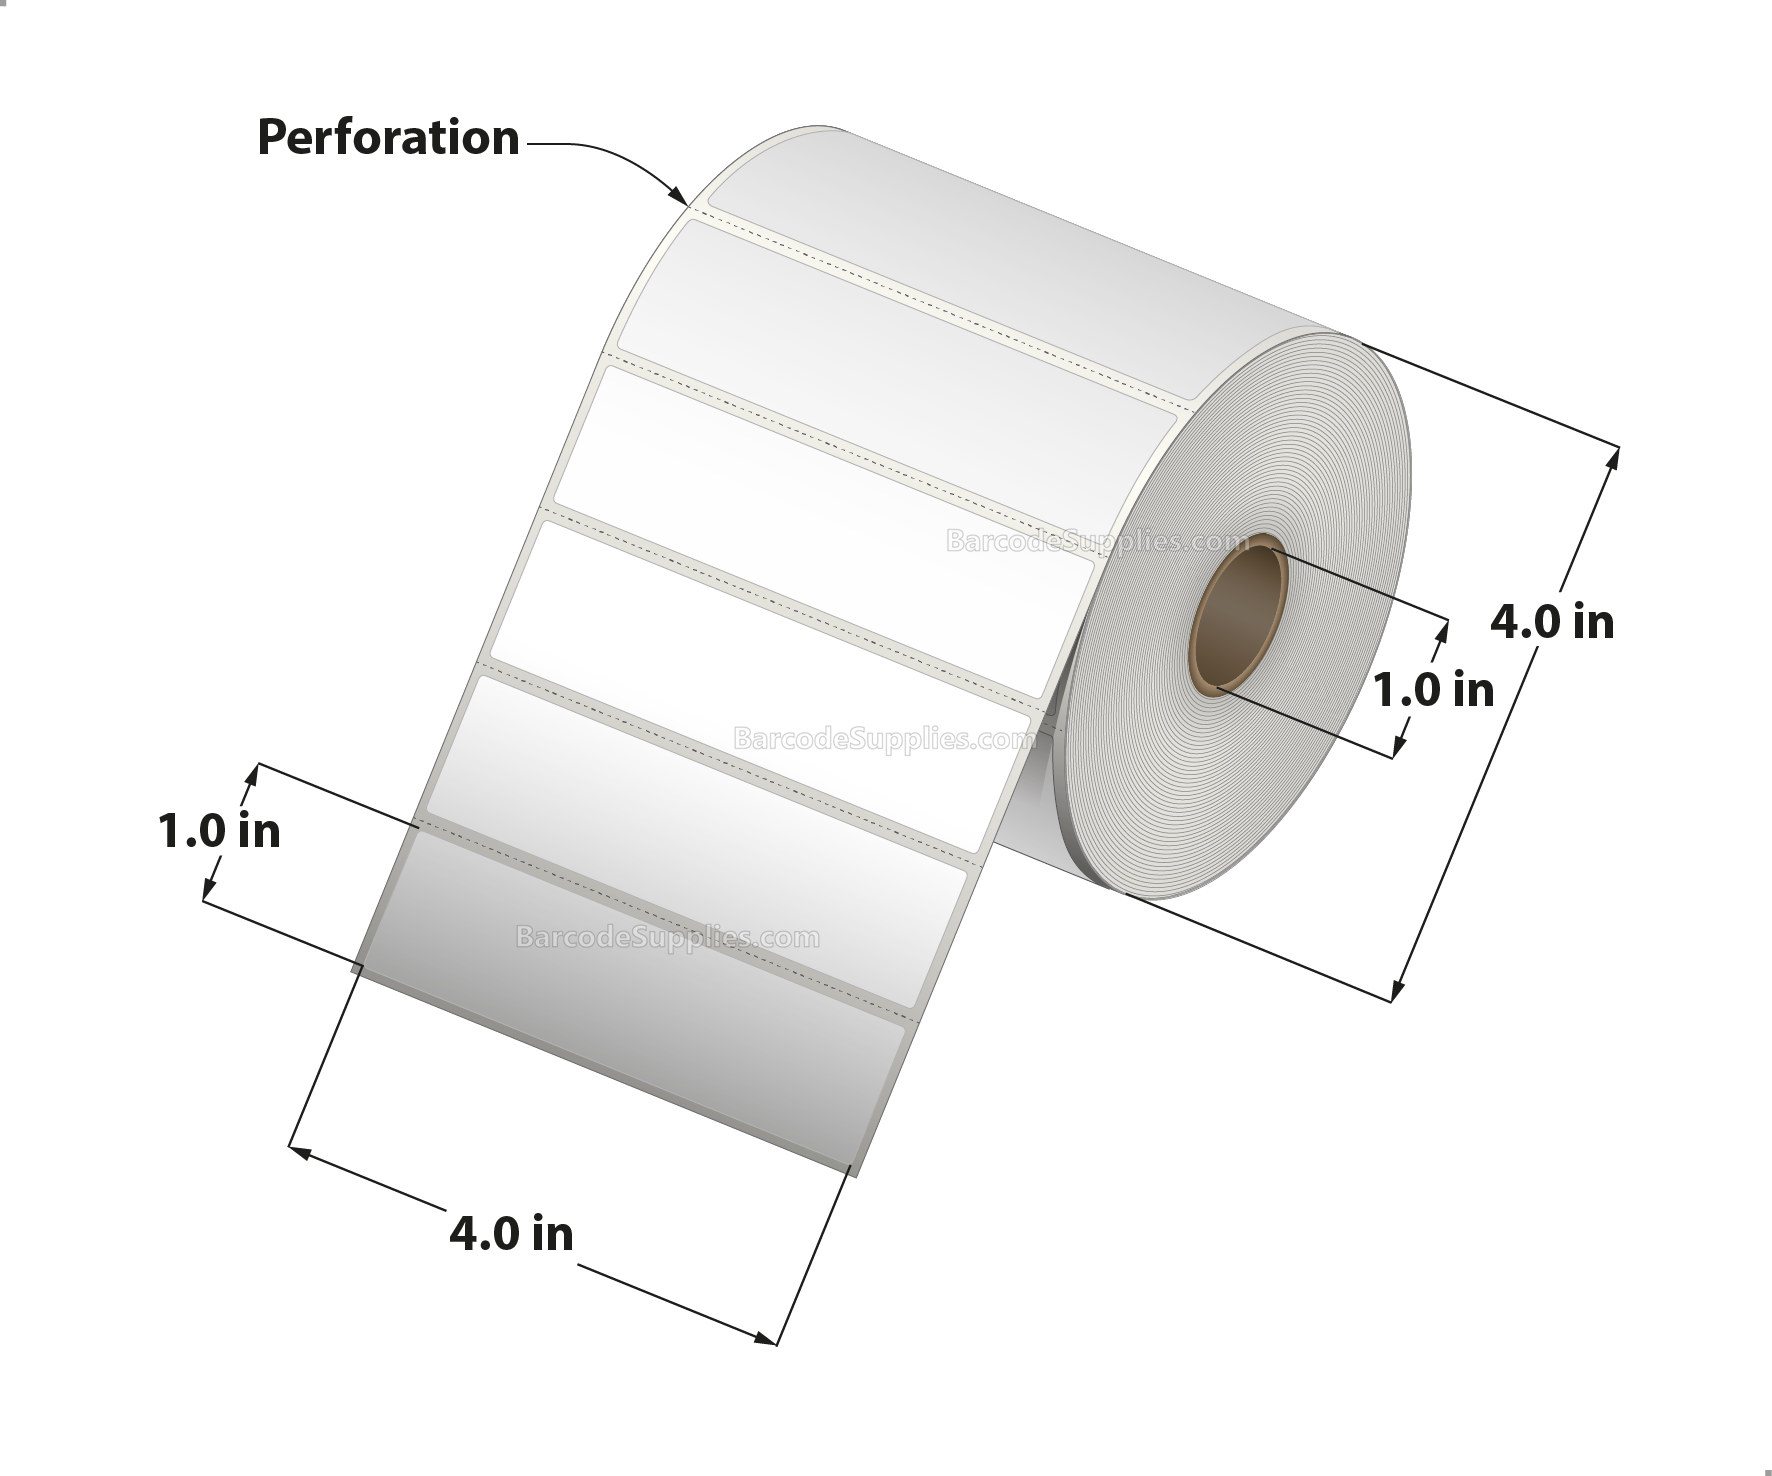 4 x 1 Thermal Transfer White Labels With Permanent Acrylic Adhesive - Perforated - 1310 Labels Per Roll - Carton Of 4 Rolls - 5240 Labels Total - MPN: TH41-14PTT